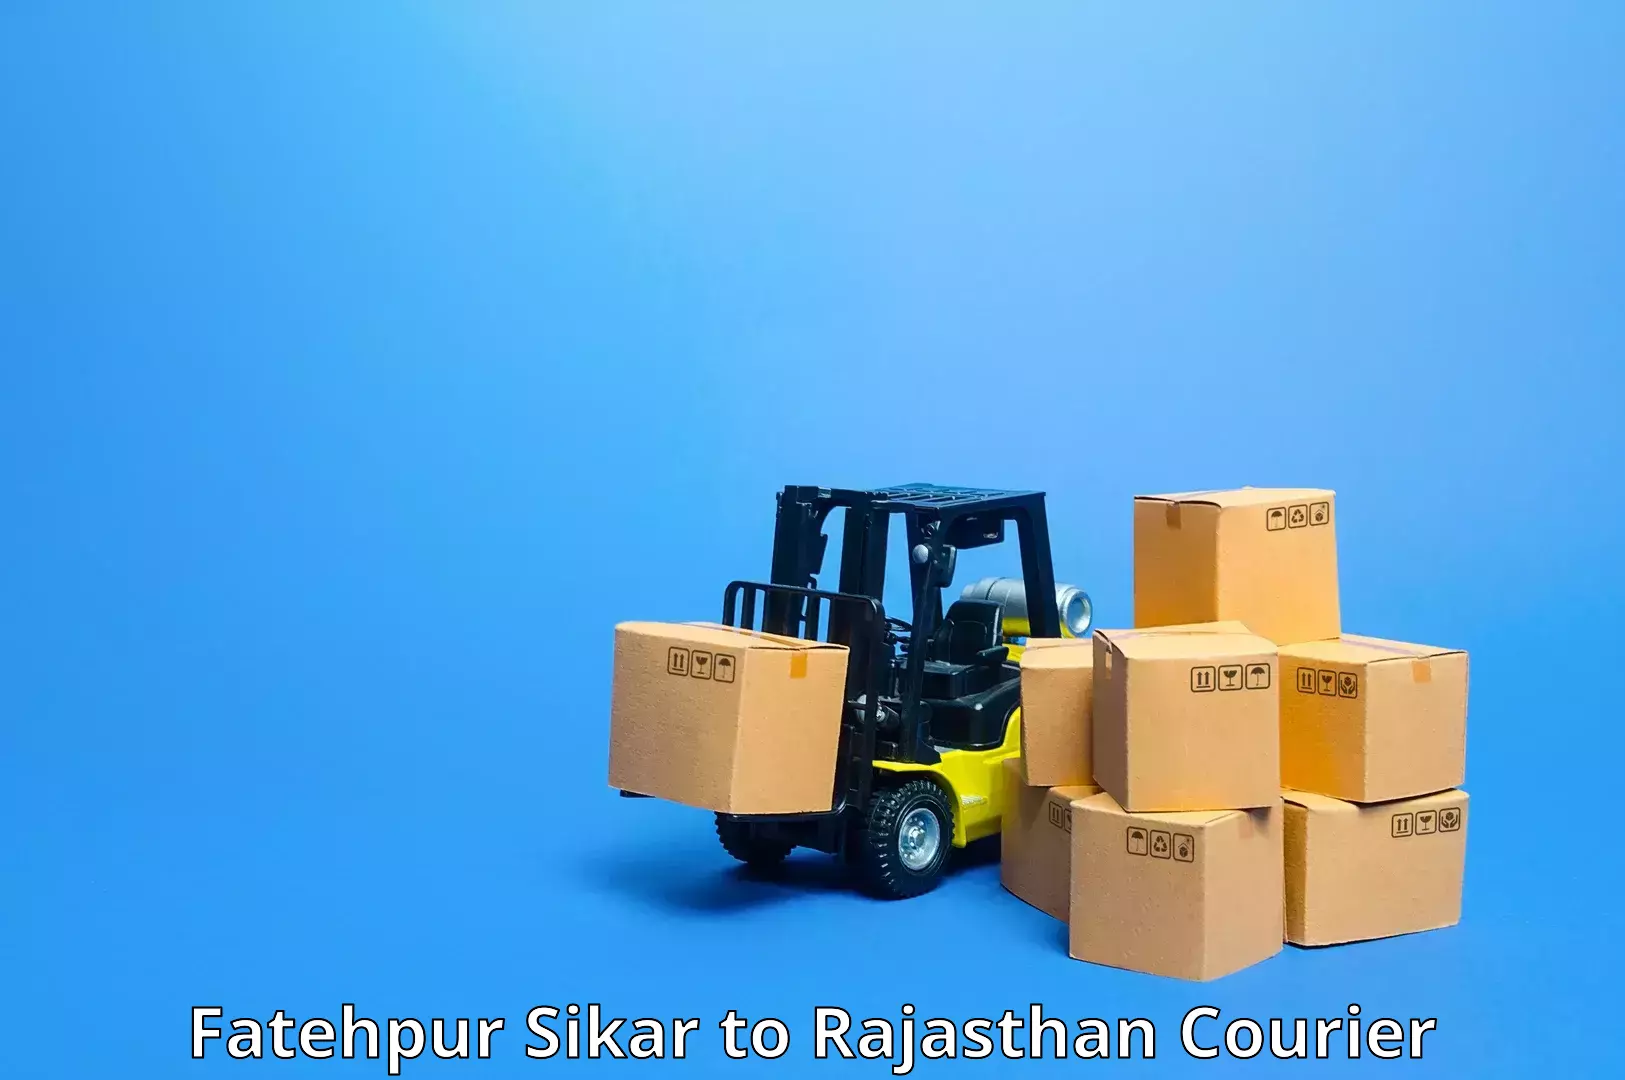 Cost-effective shipping solutions Fatehpur Sikar to Rajasthan